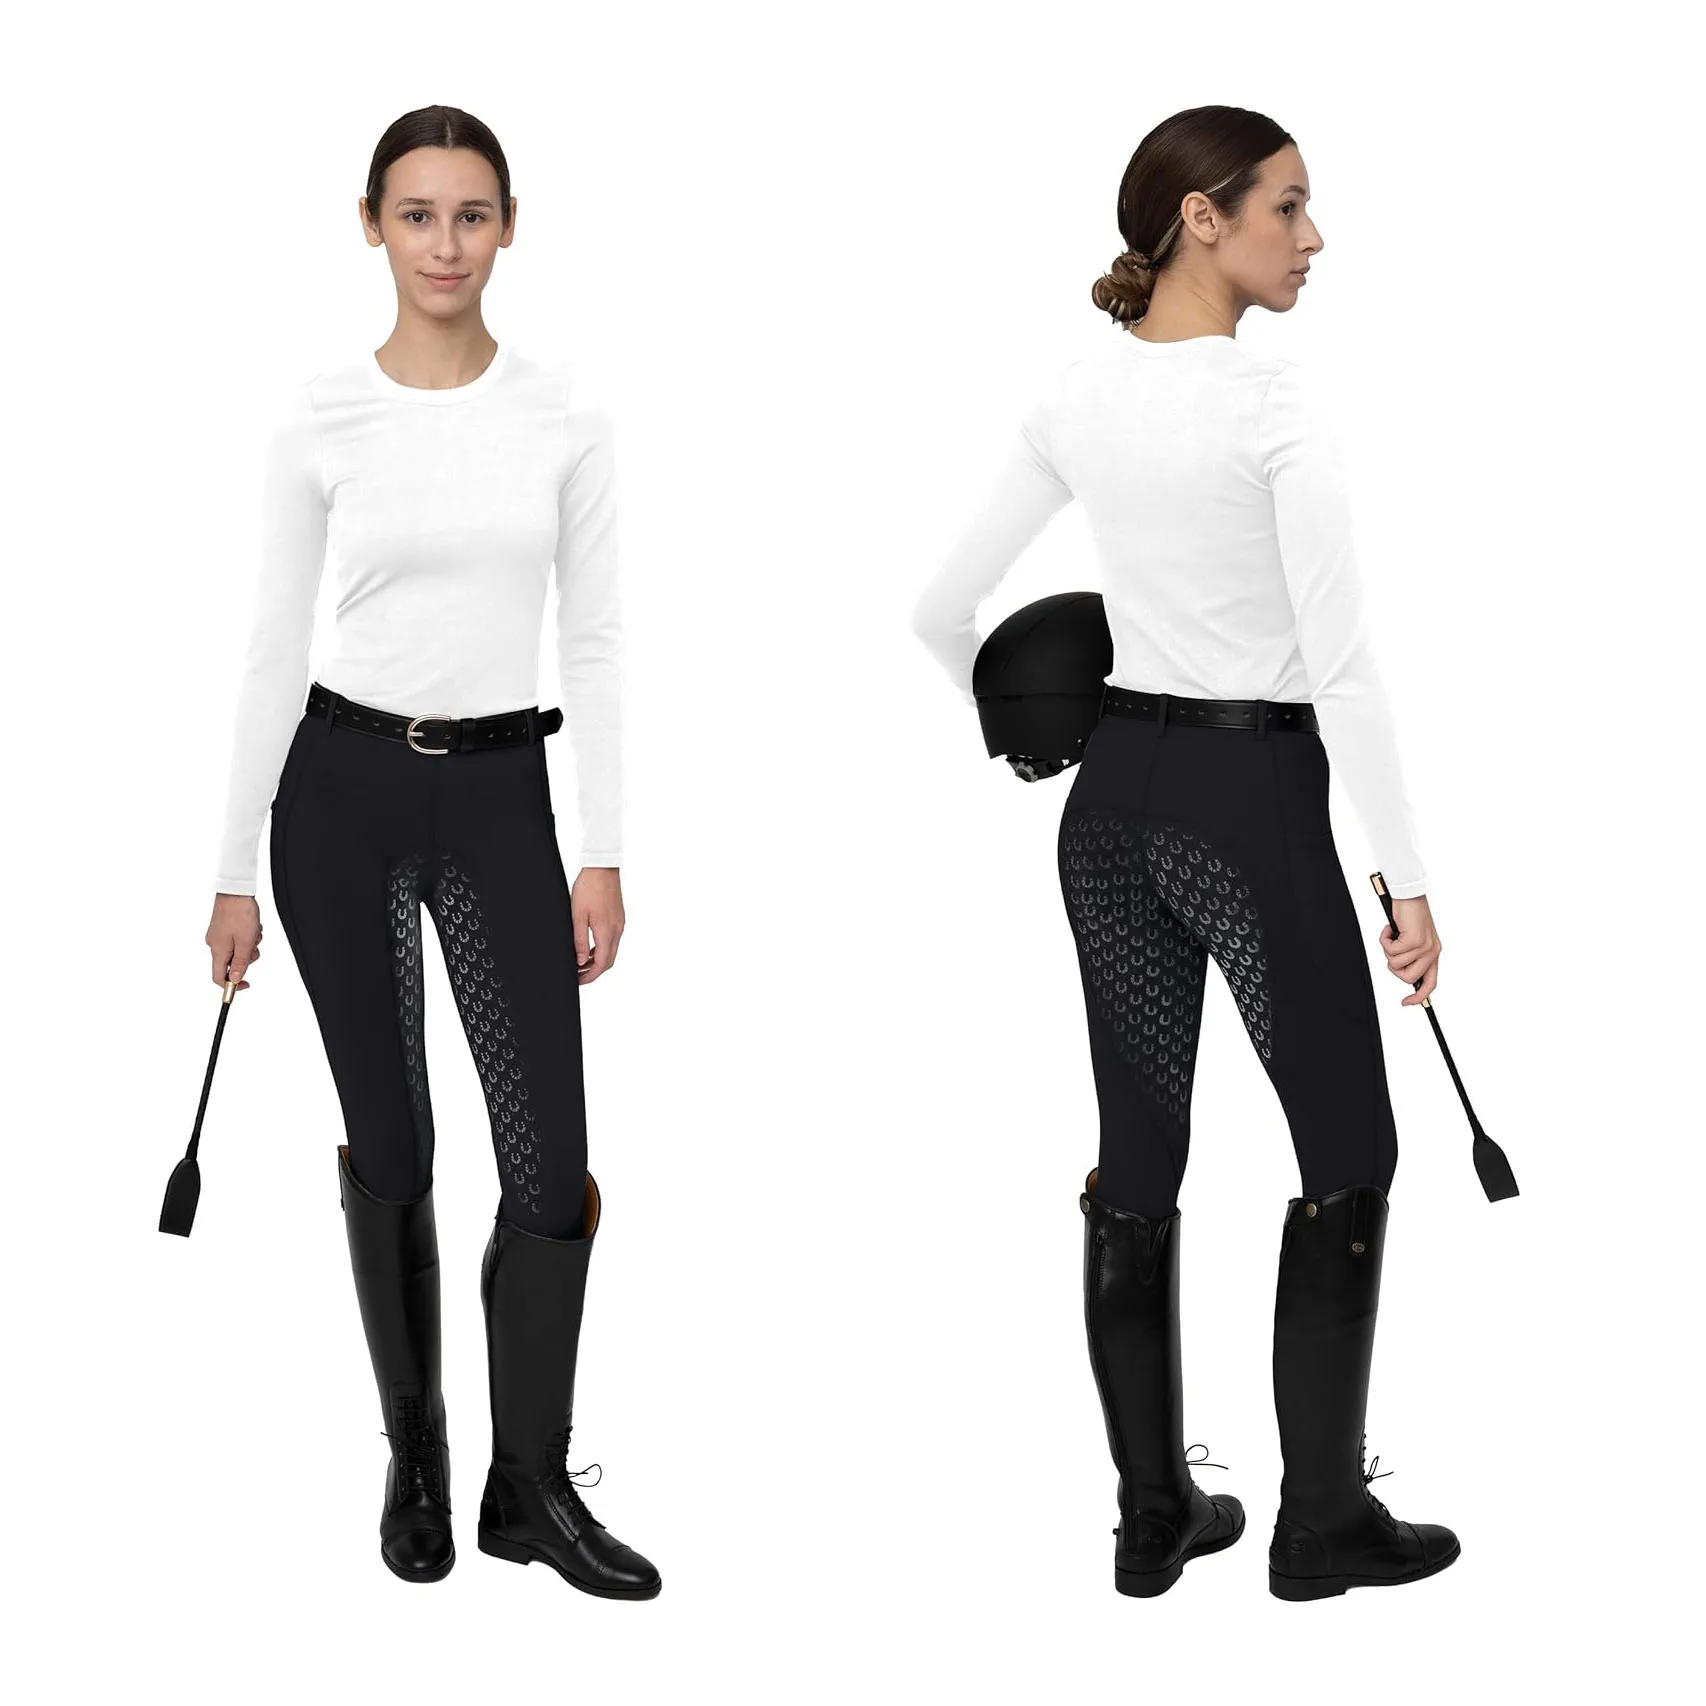 Women's Horse Riding Pants with Zipper Pockets Equestrian Horse Back Rider Breeches Silicone Schooling Tights Outdoor Sportswear